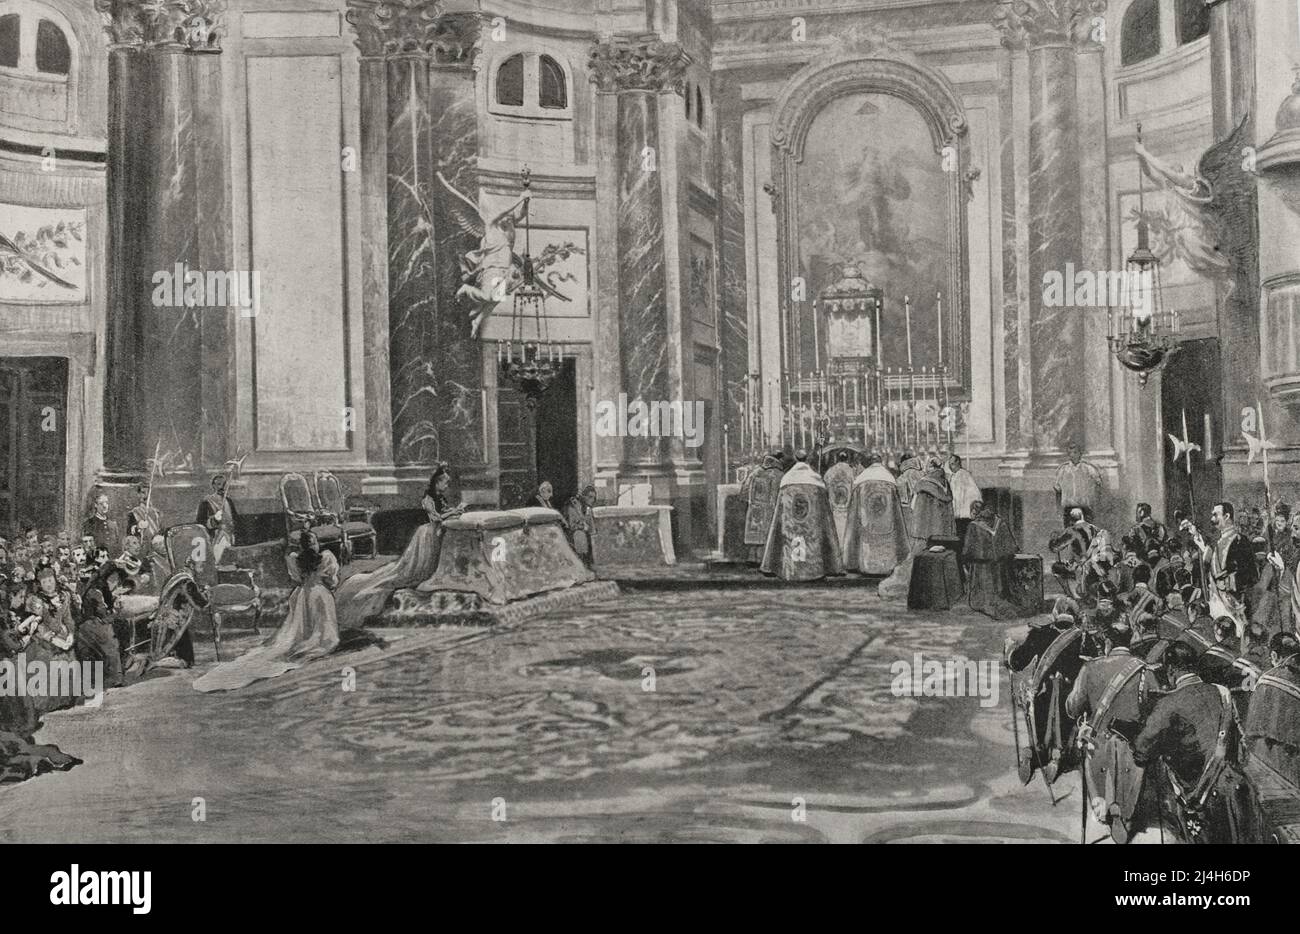 Madrid, Spain. Solemn Te Deum held on 24 January 1898 in the chapel of the Royal Palace, thanksgiving for the pacification of the Philippines (Spanish colonial territory). Illustration by Comba. Photoengraving by Laporta. La Ilustración Española y Americana, 1898. Stock Photo